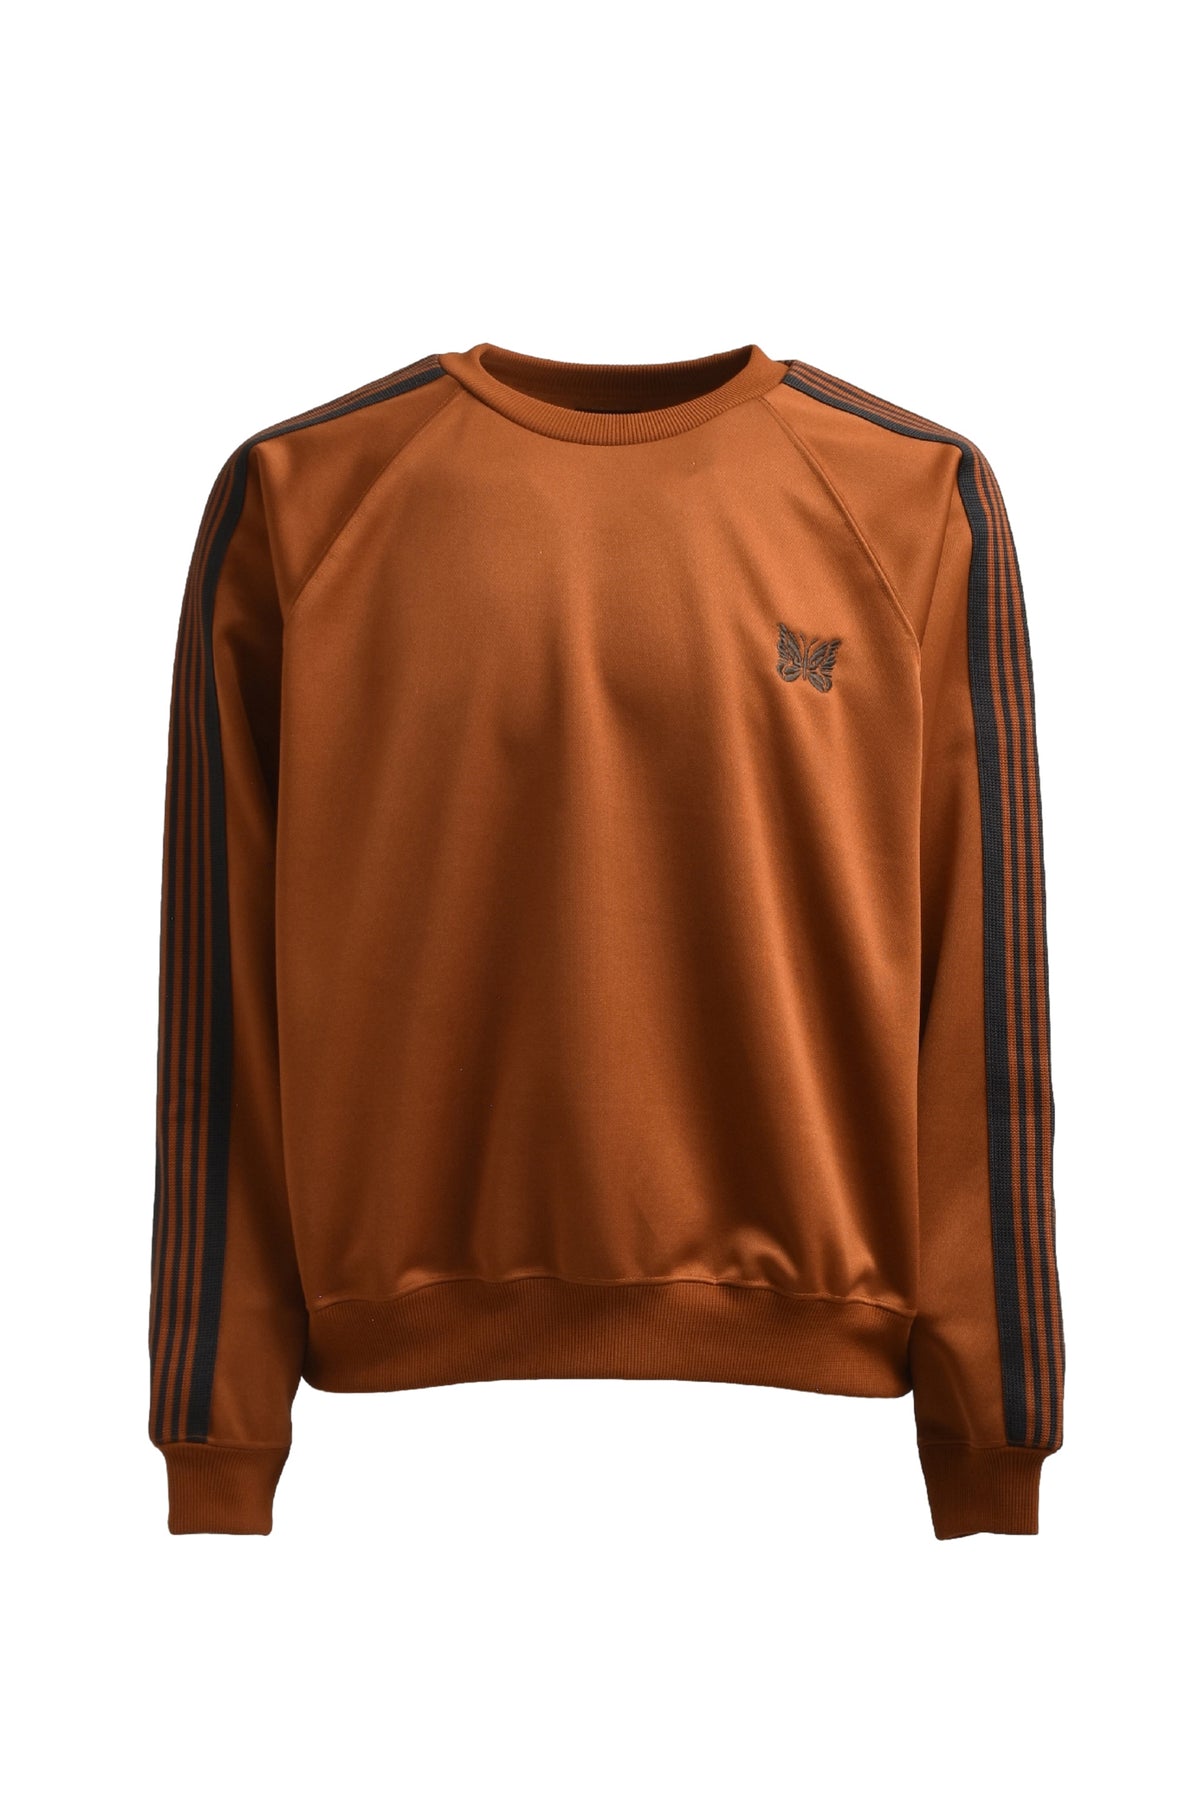 TRACK CREW NECK SHIRT - POLY SMOOTH / RUST